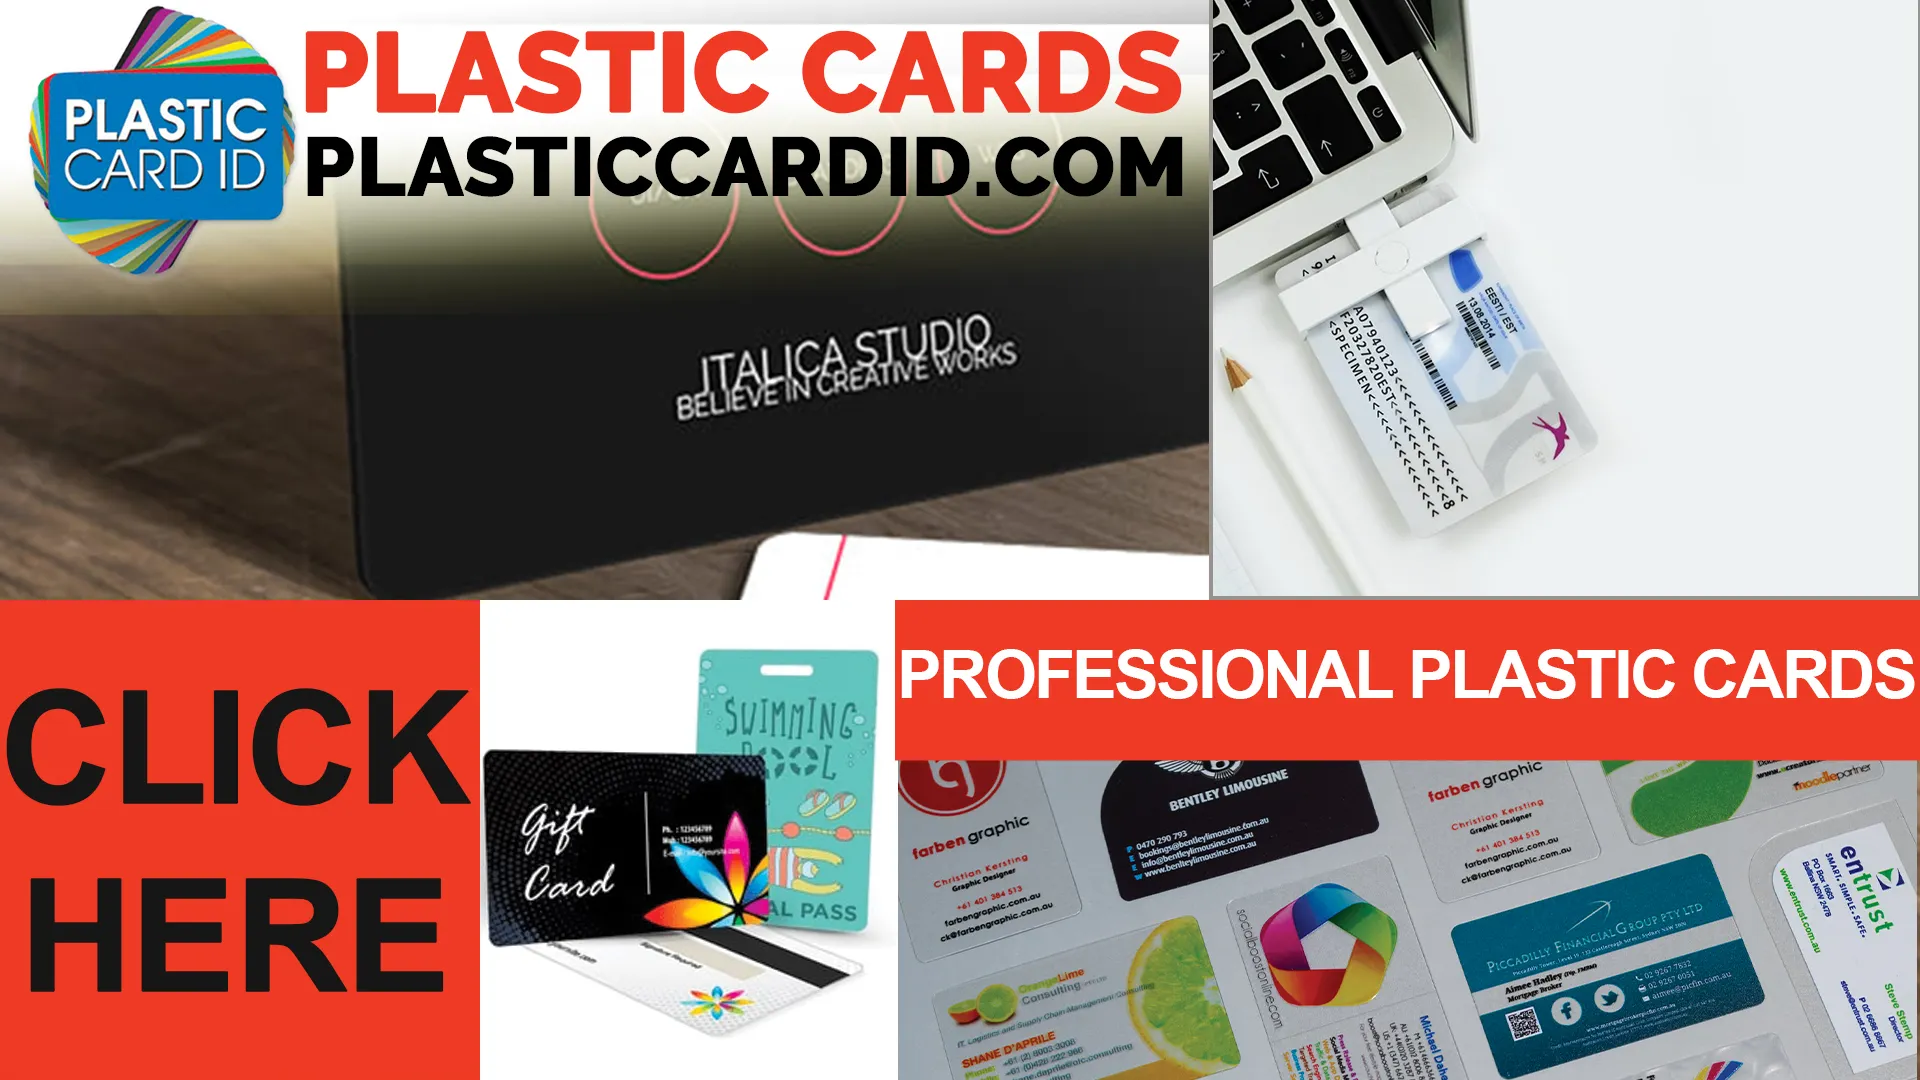 Fulfilling the Demand for Customized Card Solutions